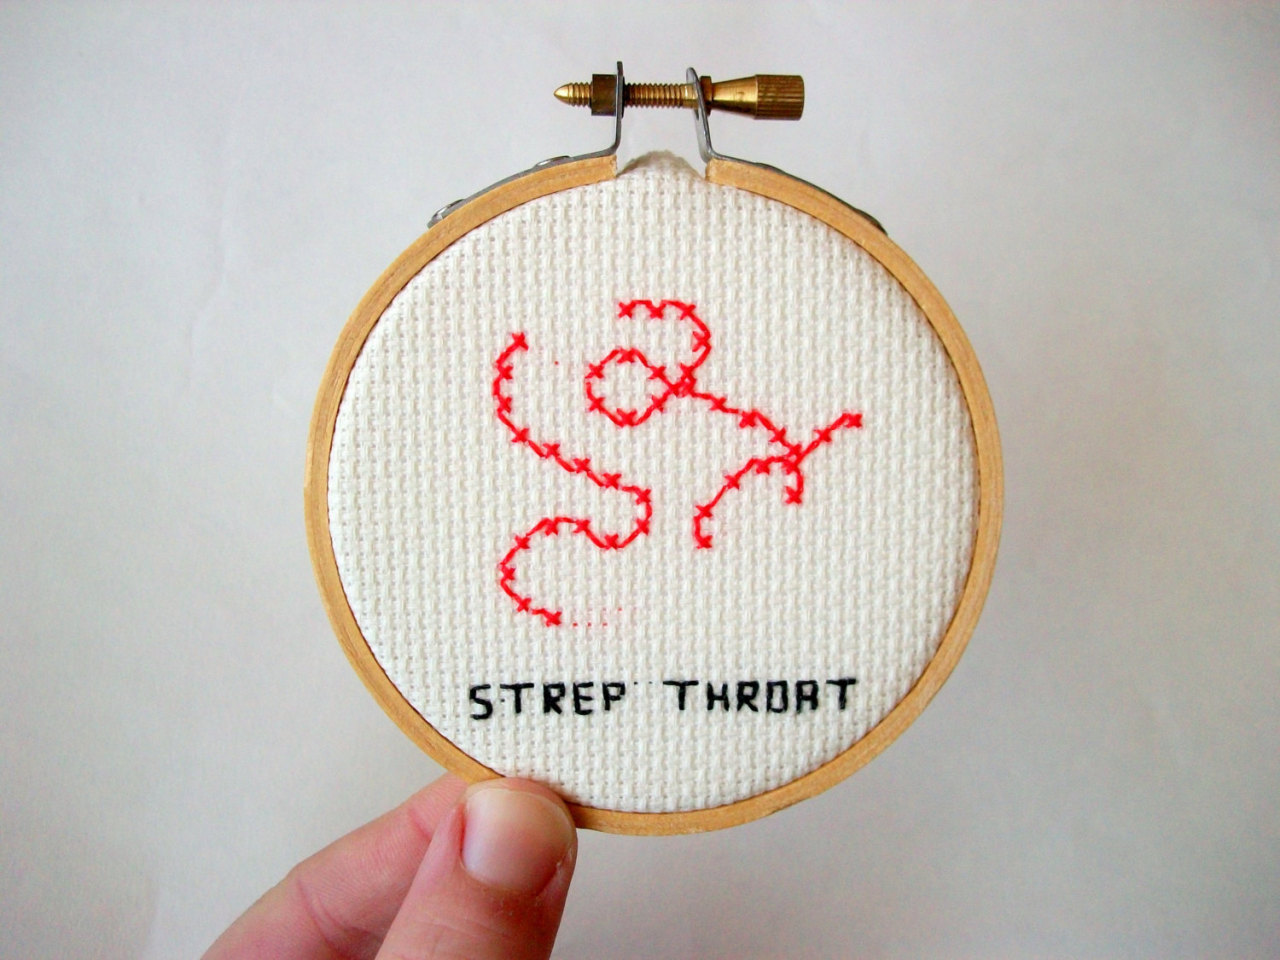 culturenlifestyle: Adorable Cross-Stitched Illustrations of Microbes and Germs by